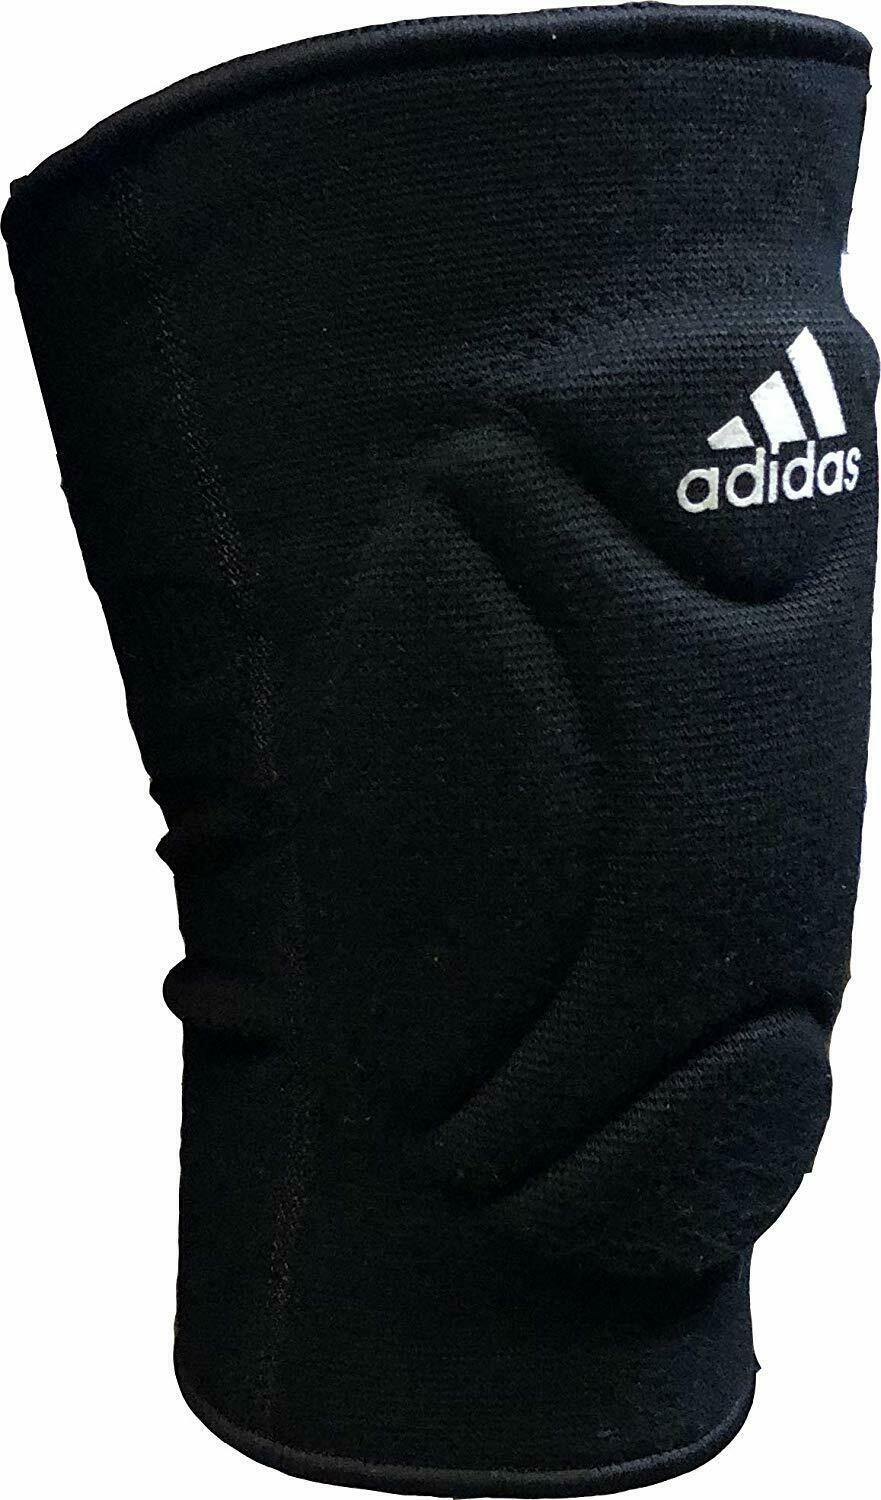 Adidas Wrestling Knee Pad for wrestlers in high School, youth